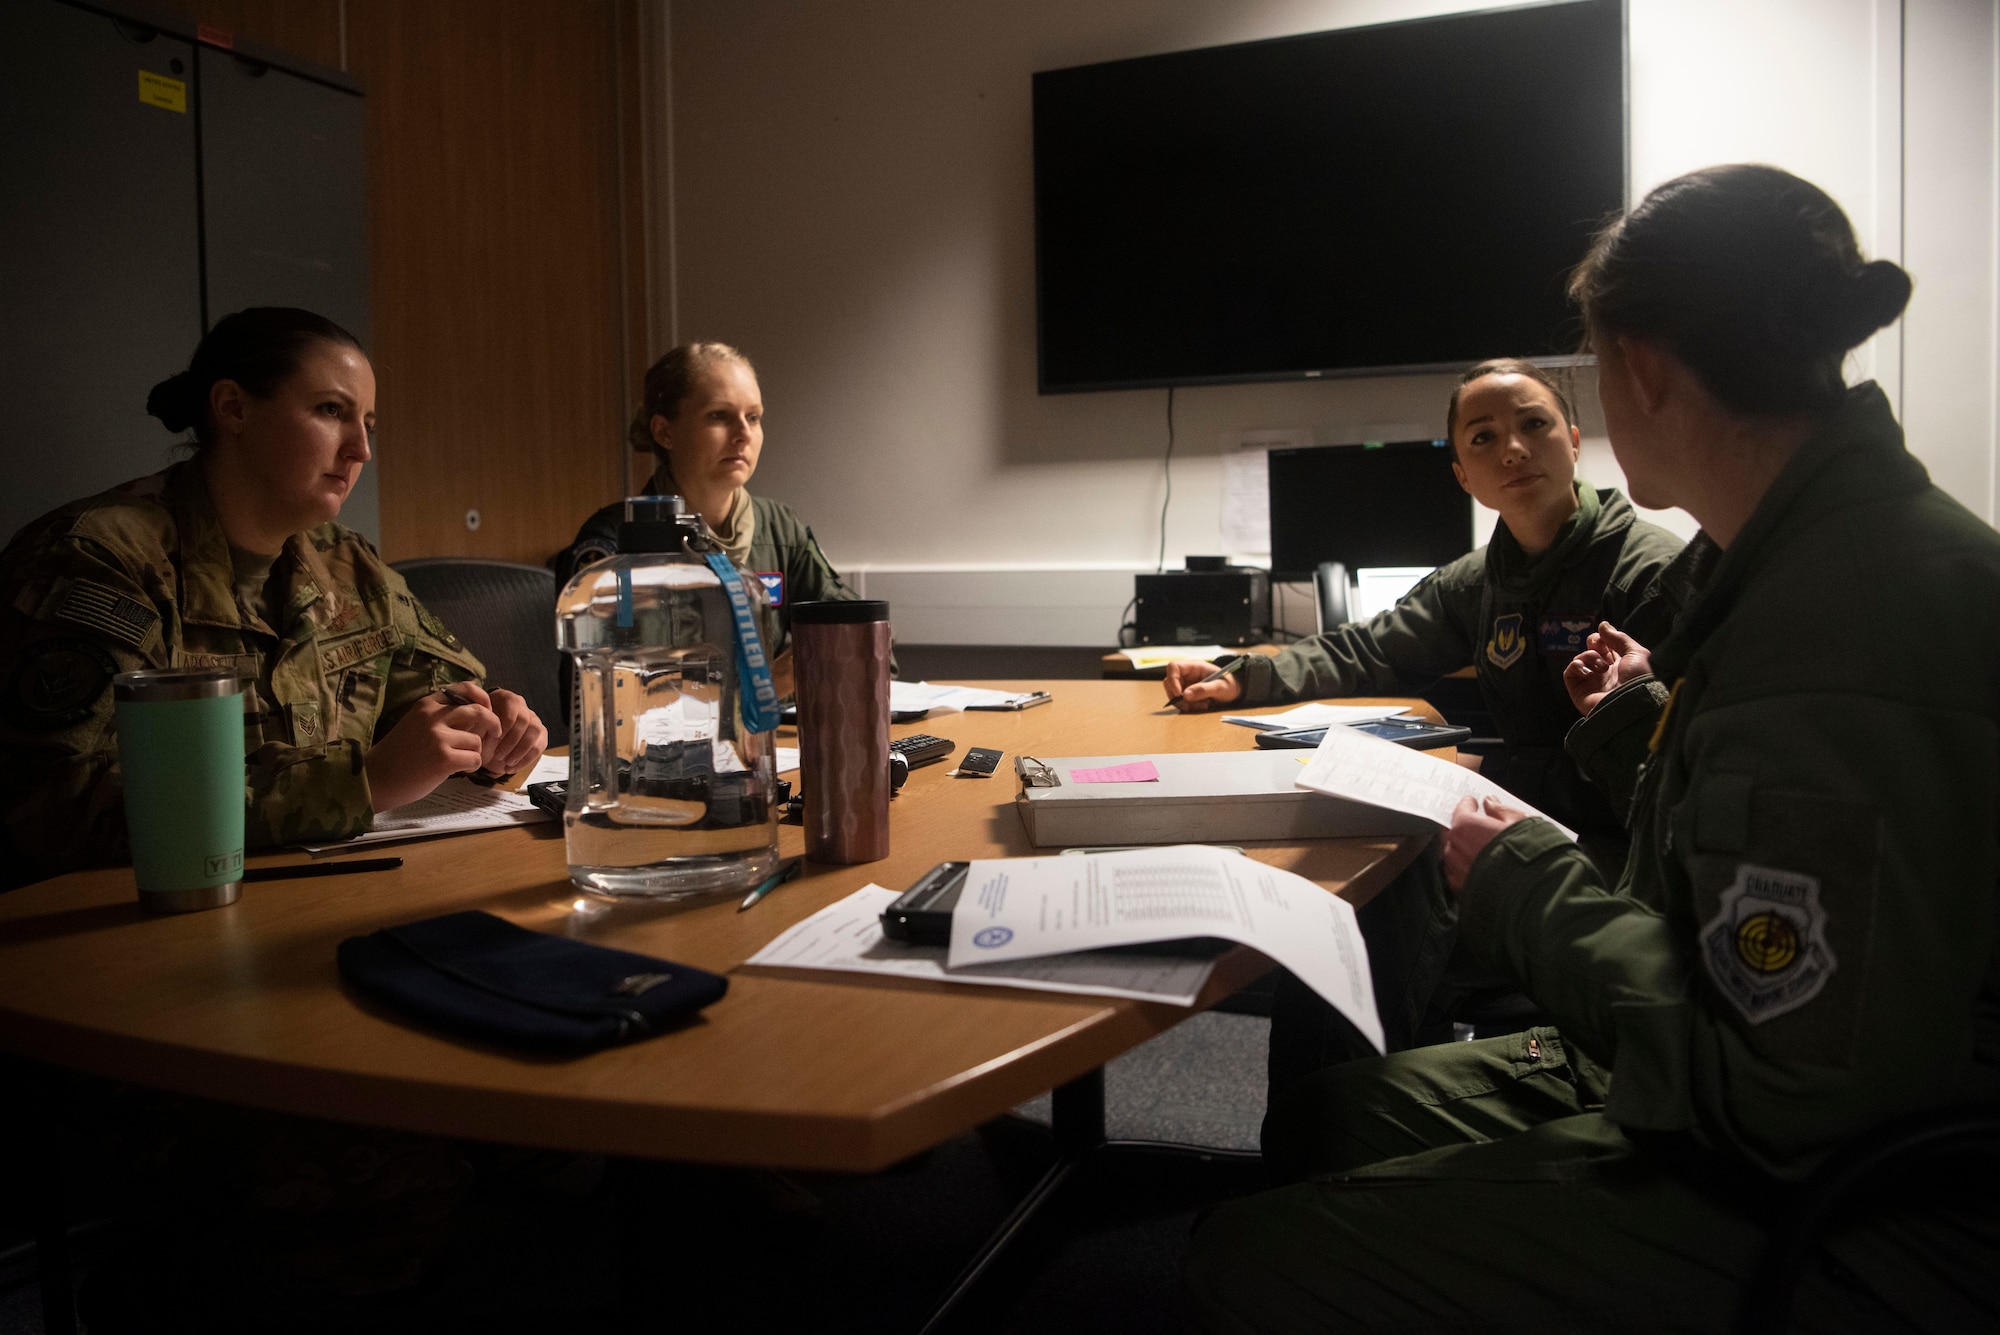 Aircrew members from the 351st Air Refueling Squadron conduct a mission briefing before supporting a strategic bomber mission at RAF Mildenhall, England, June 18, 2020. Four KC-135 Stratotankers provided in-air refueling for B-2 Spirit stealth bombers from the 509th Bomb Wing at Whiteman Air Force Base, Missouri. (U.S. Air Force photo by Airman 1st Class Joseph Barron)